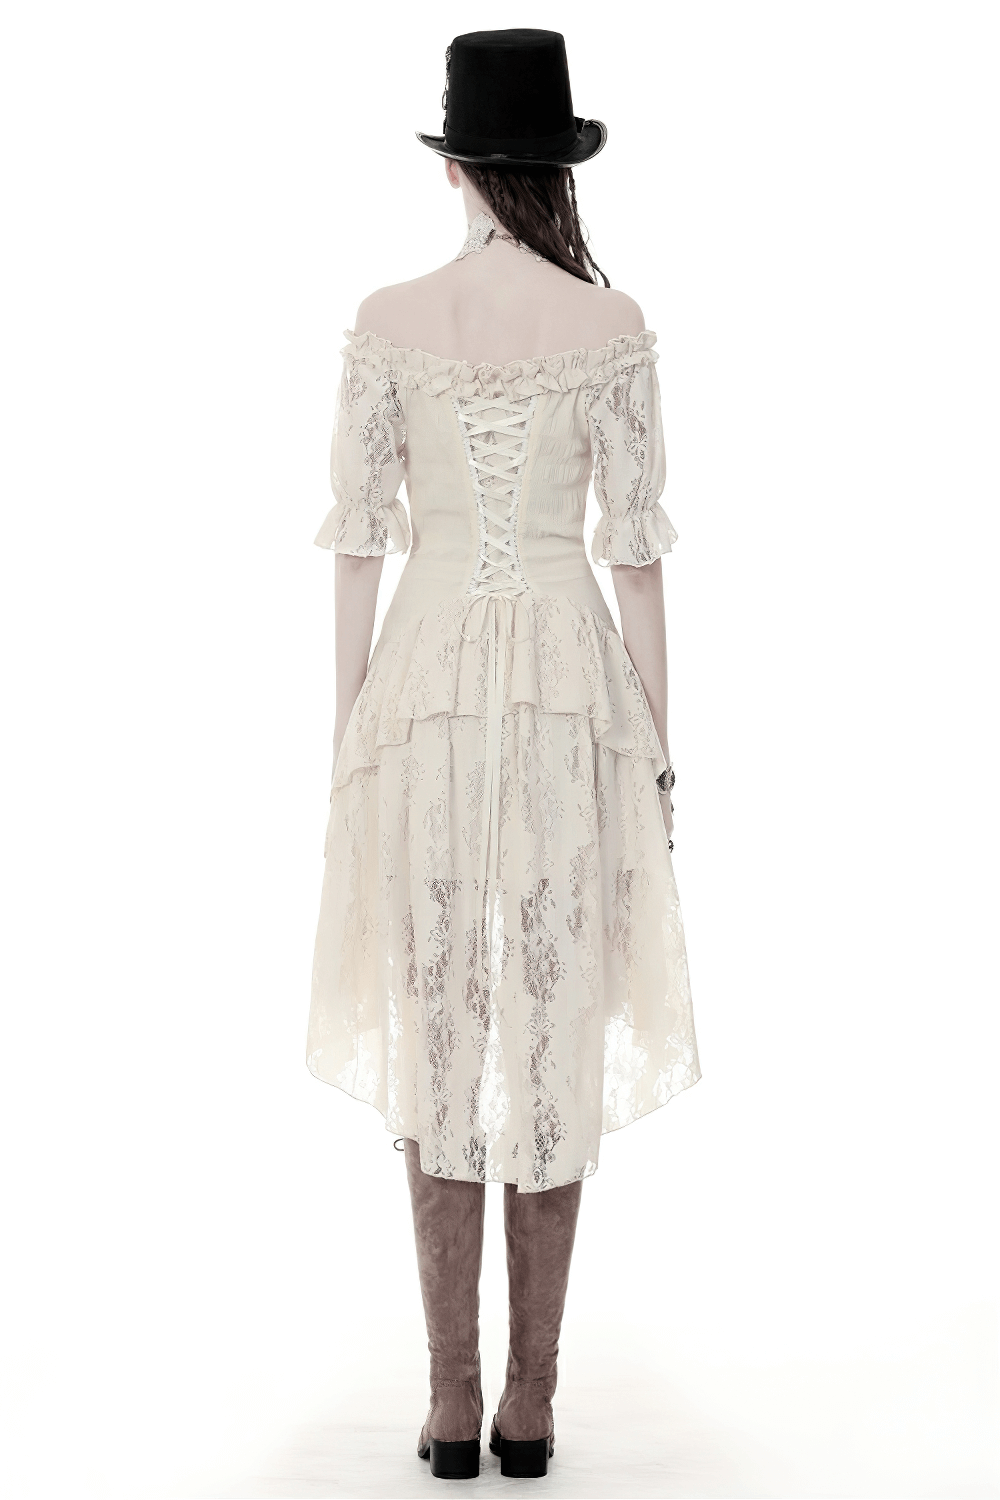 Steampunk Victorian Off-Shoulder Short Sleeves Lace Dress